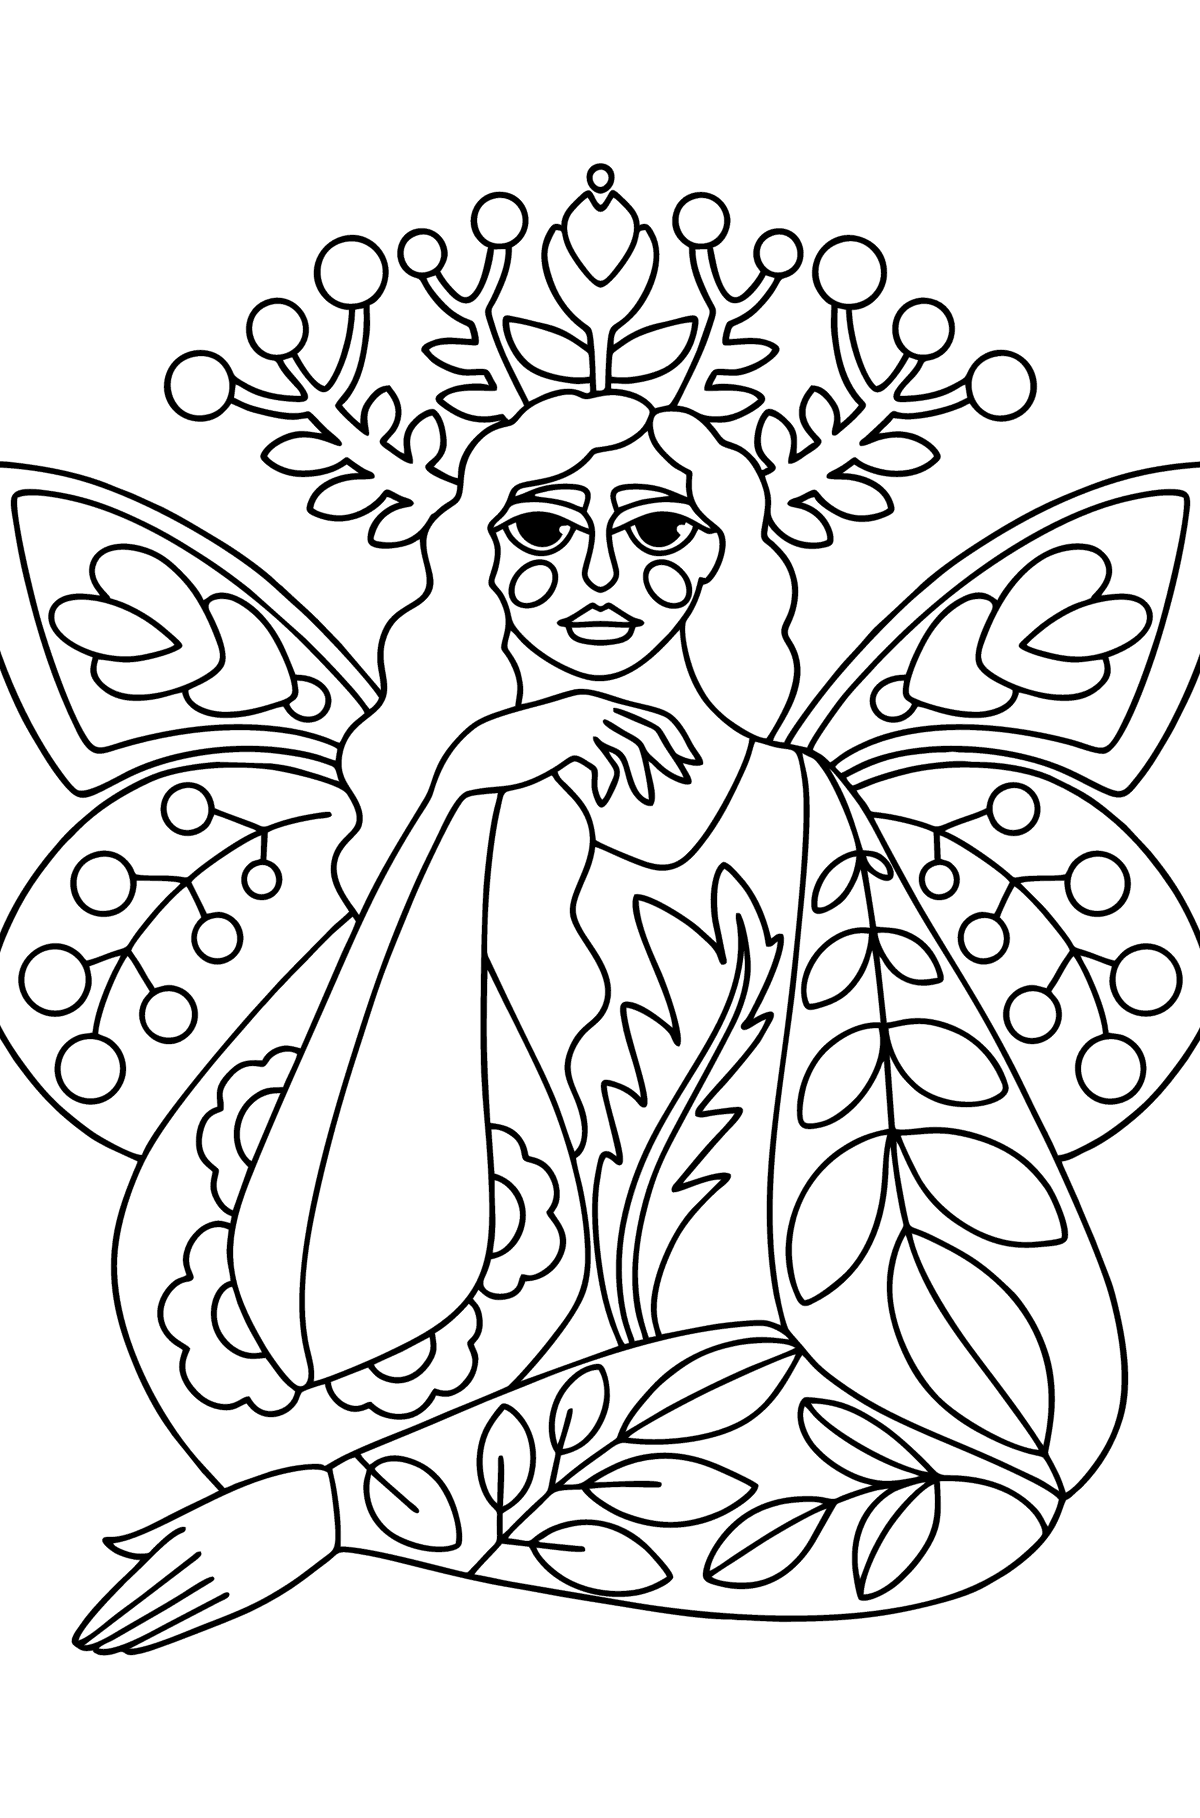 Fairy Tattoo (difficult) coloring page - Coloring Pages for Kids